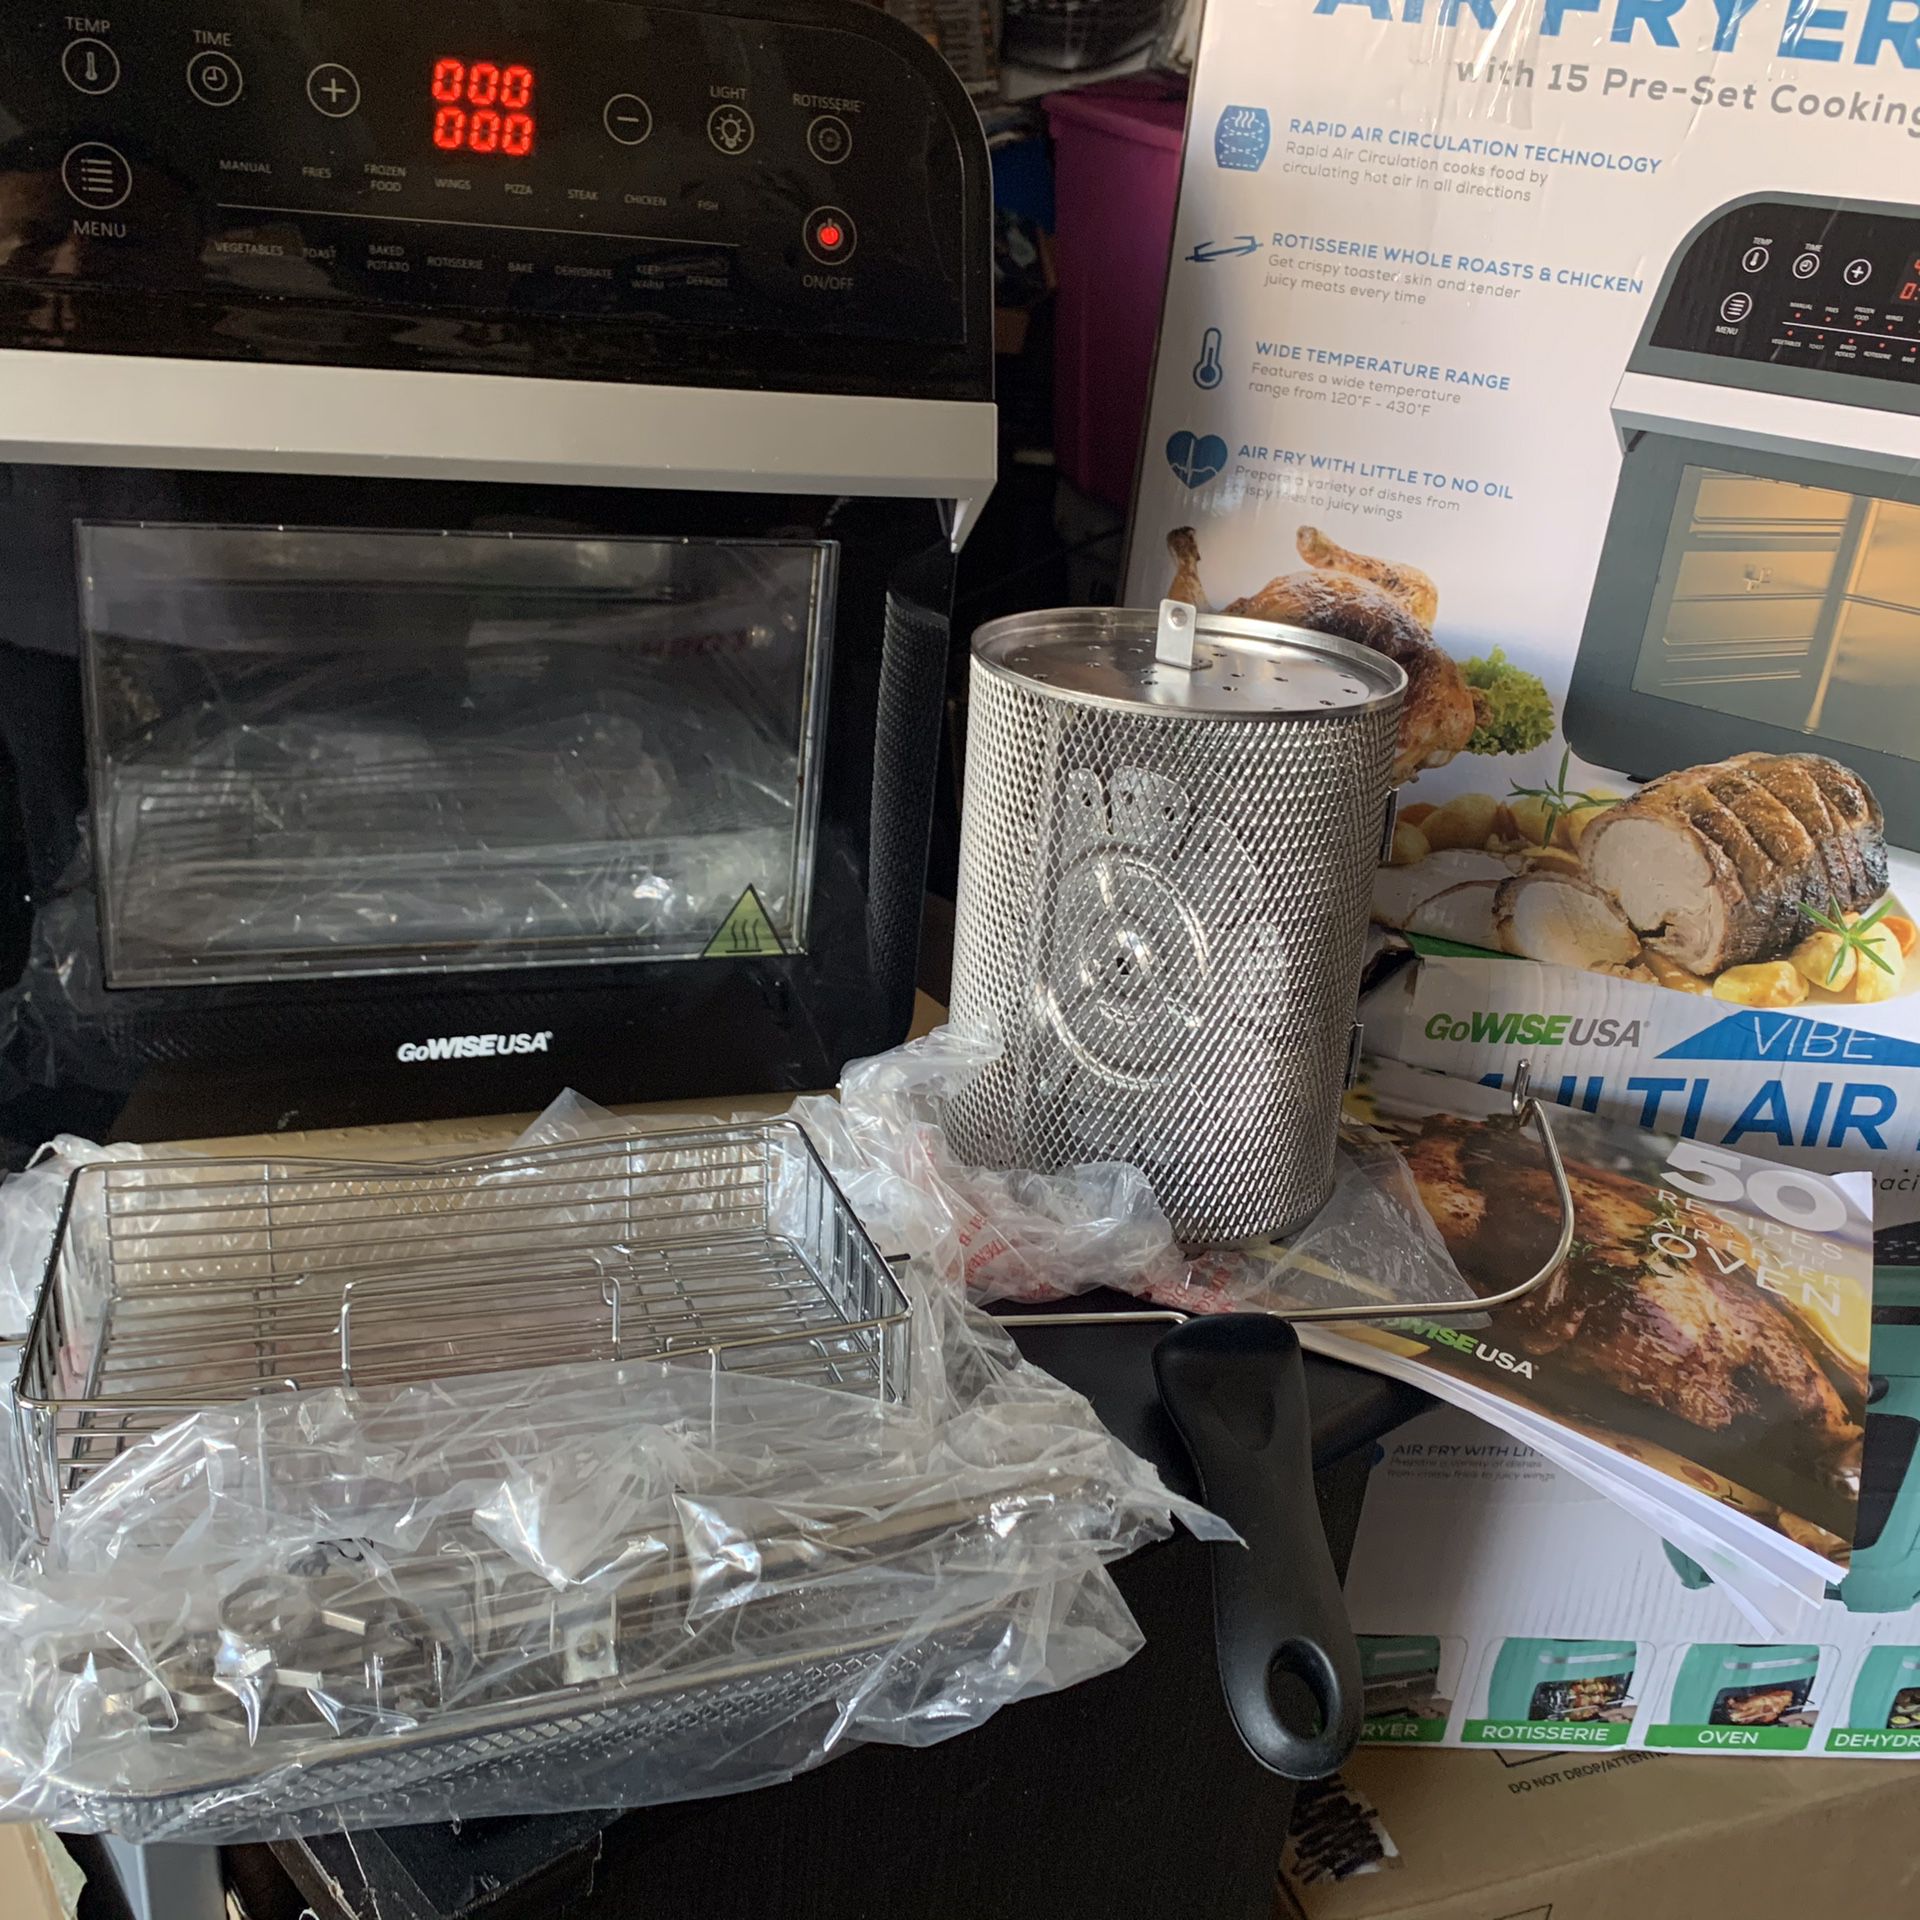 GoWise deluxe 12.7 quart 15 prest electric air fryer oven black new excellent condition all accessories included in original box